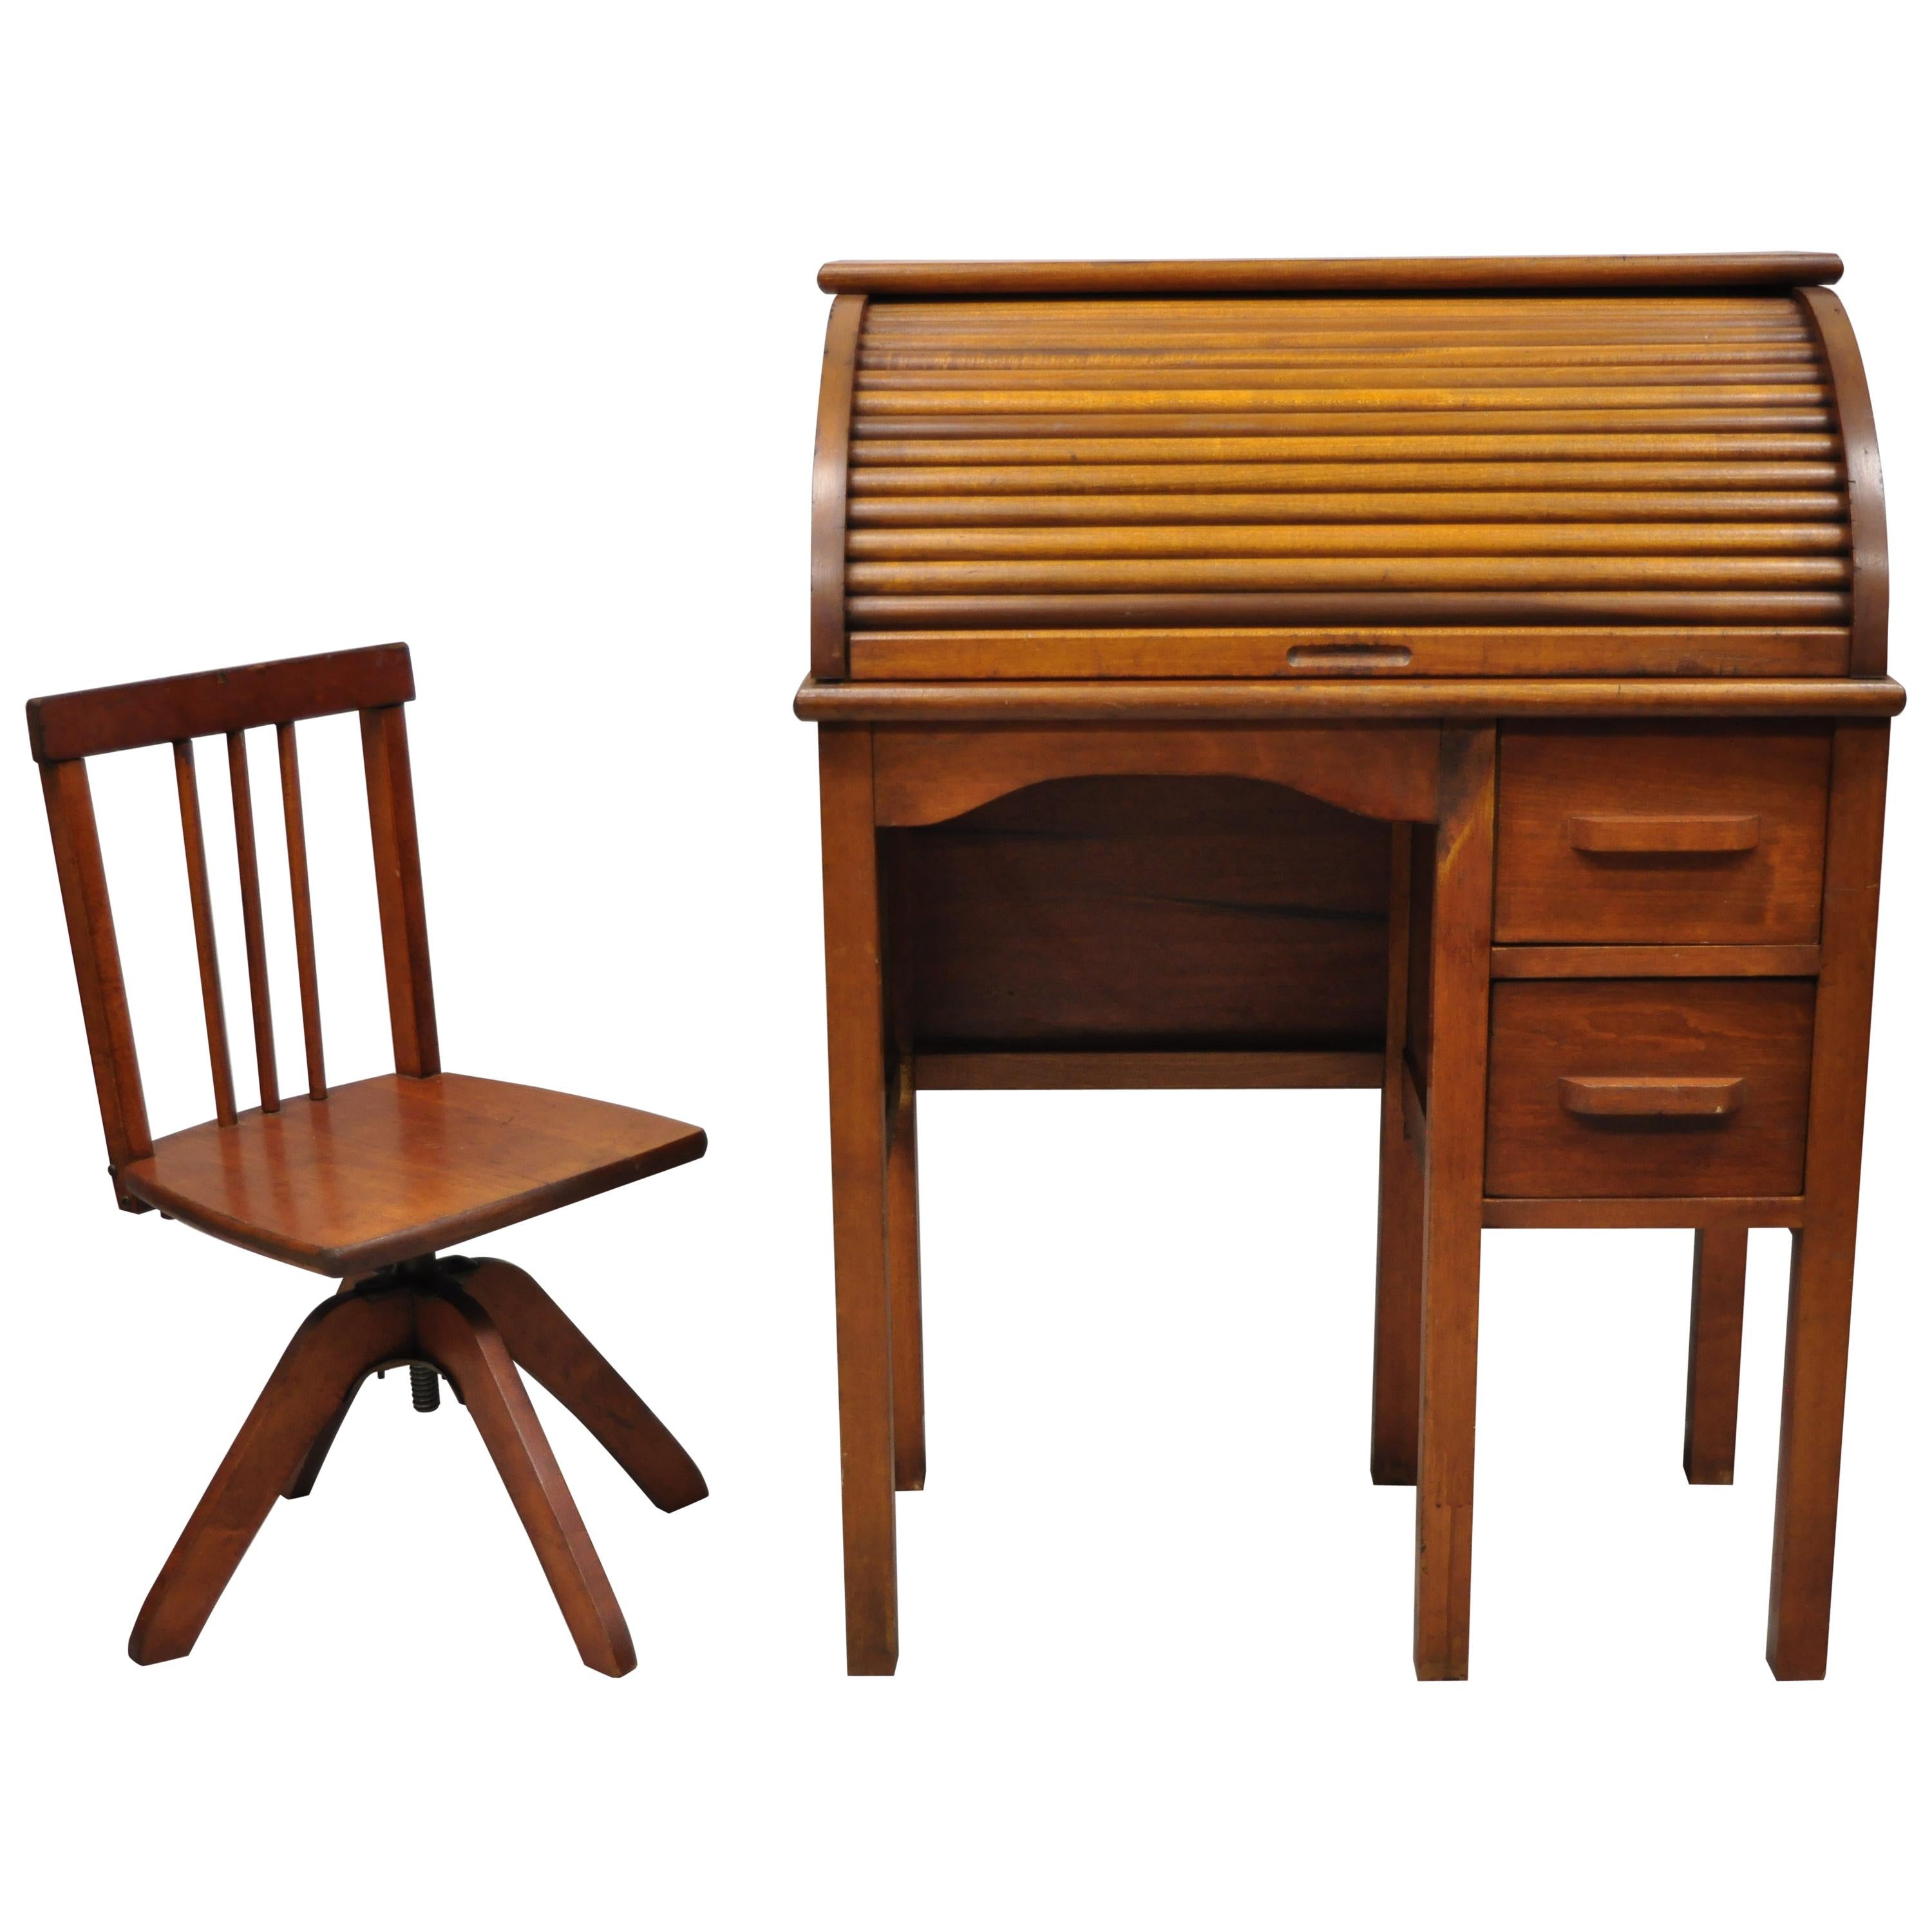 Vintage Children's Size Child's Roll Top Writing Desk and School Chairs, a  Set at 1stDibs | antique kids desk, child roll top desk, kids rolltop desk